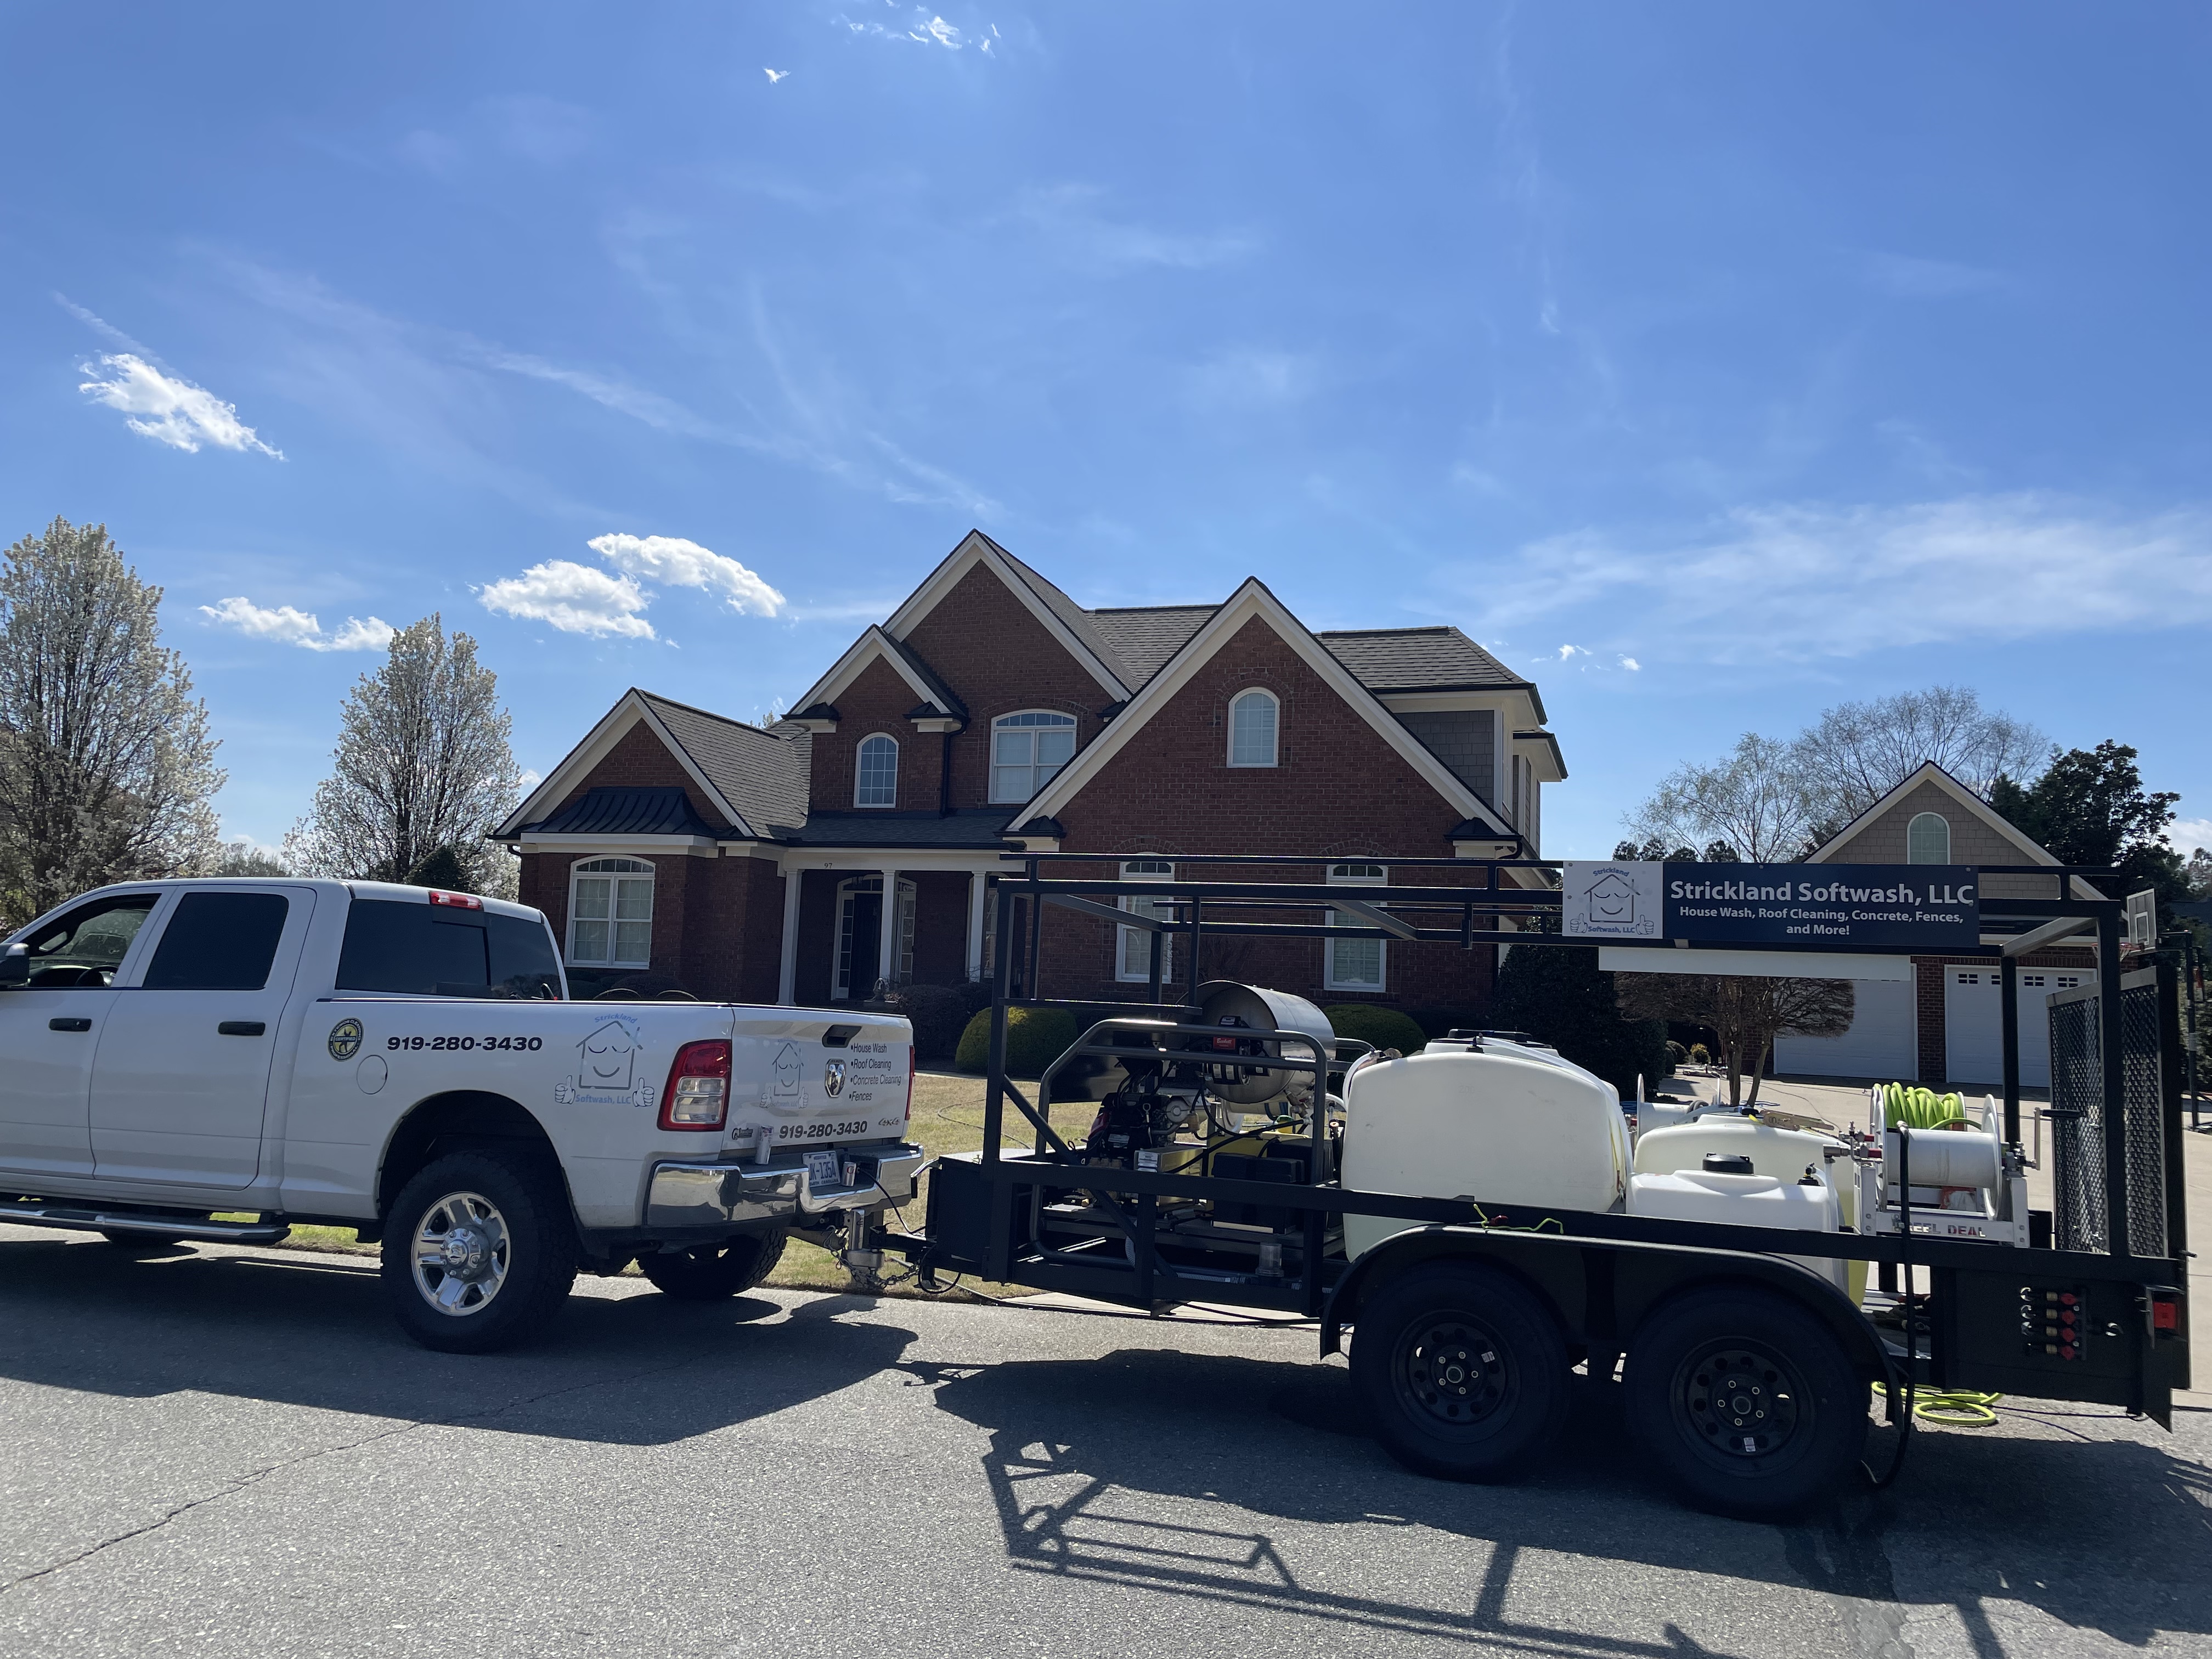 House Washing and Concrete Cleaning in Garner, NC